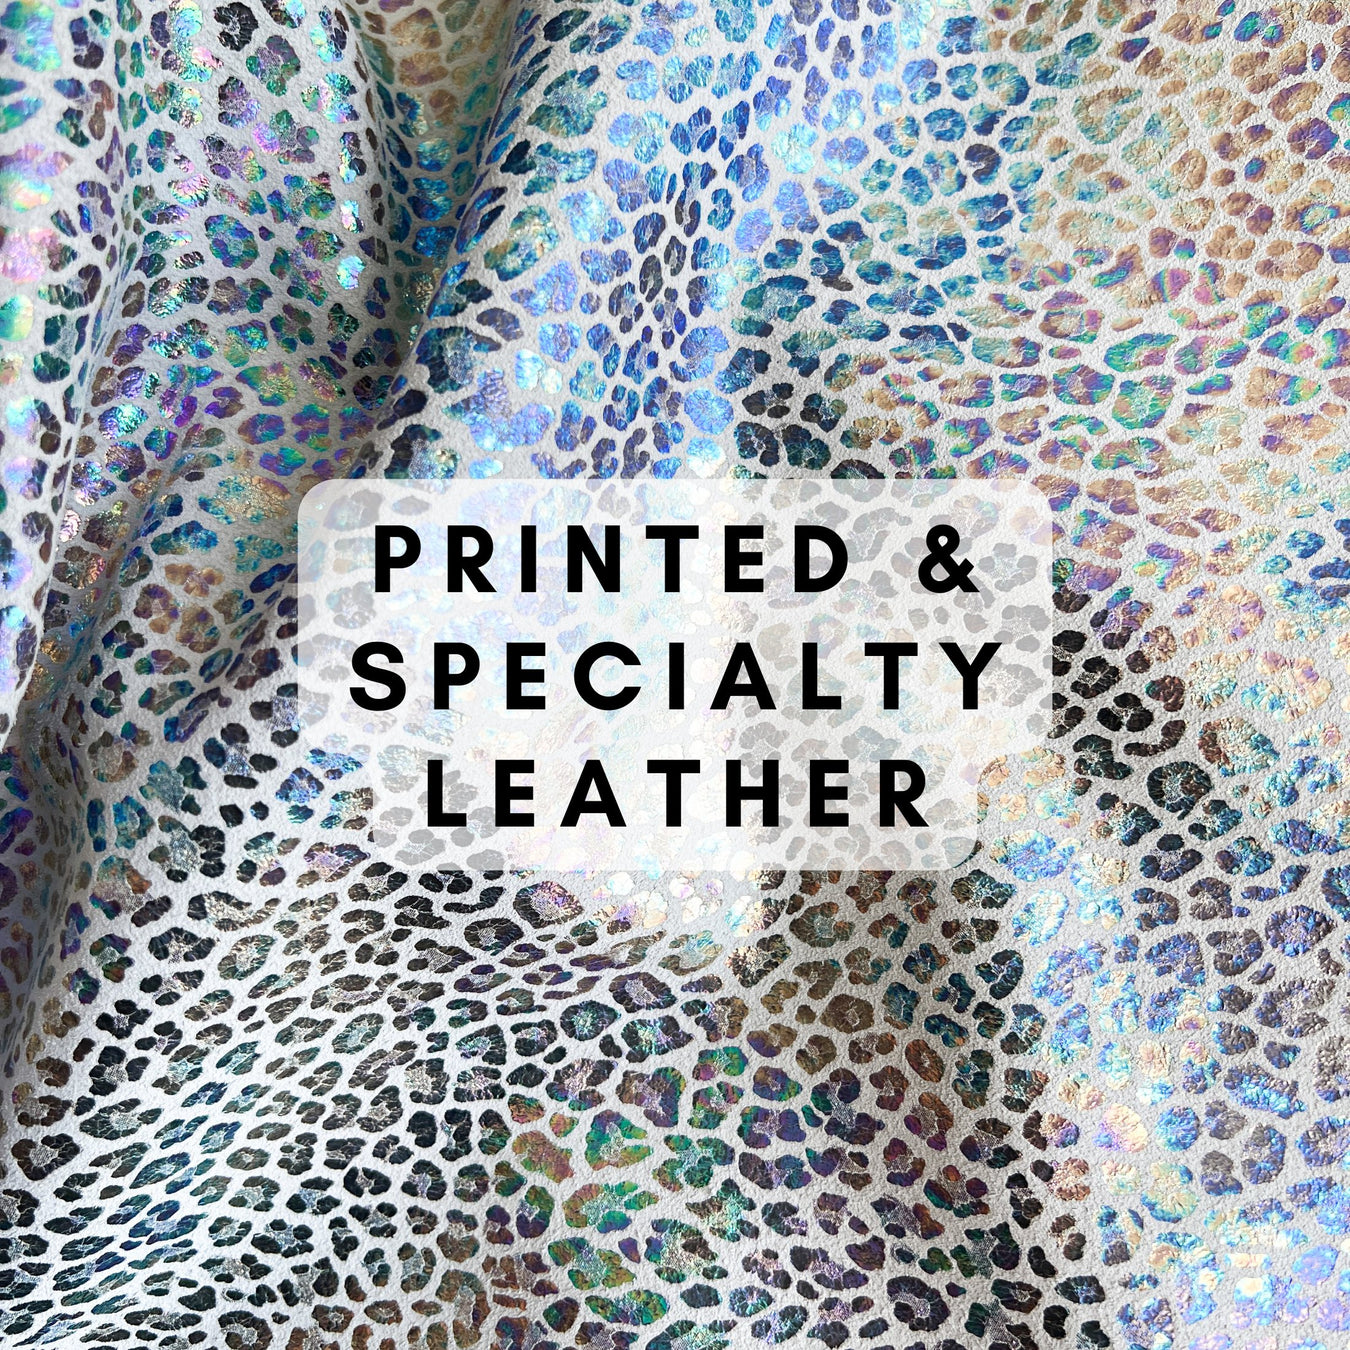 Printed & Specialty Leather